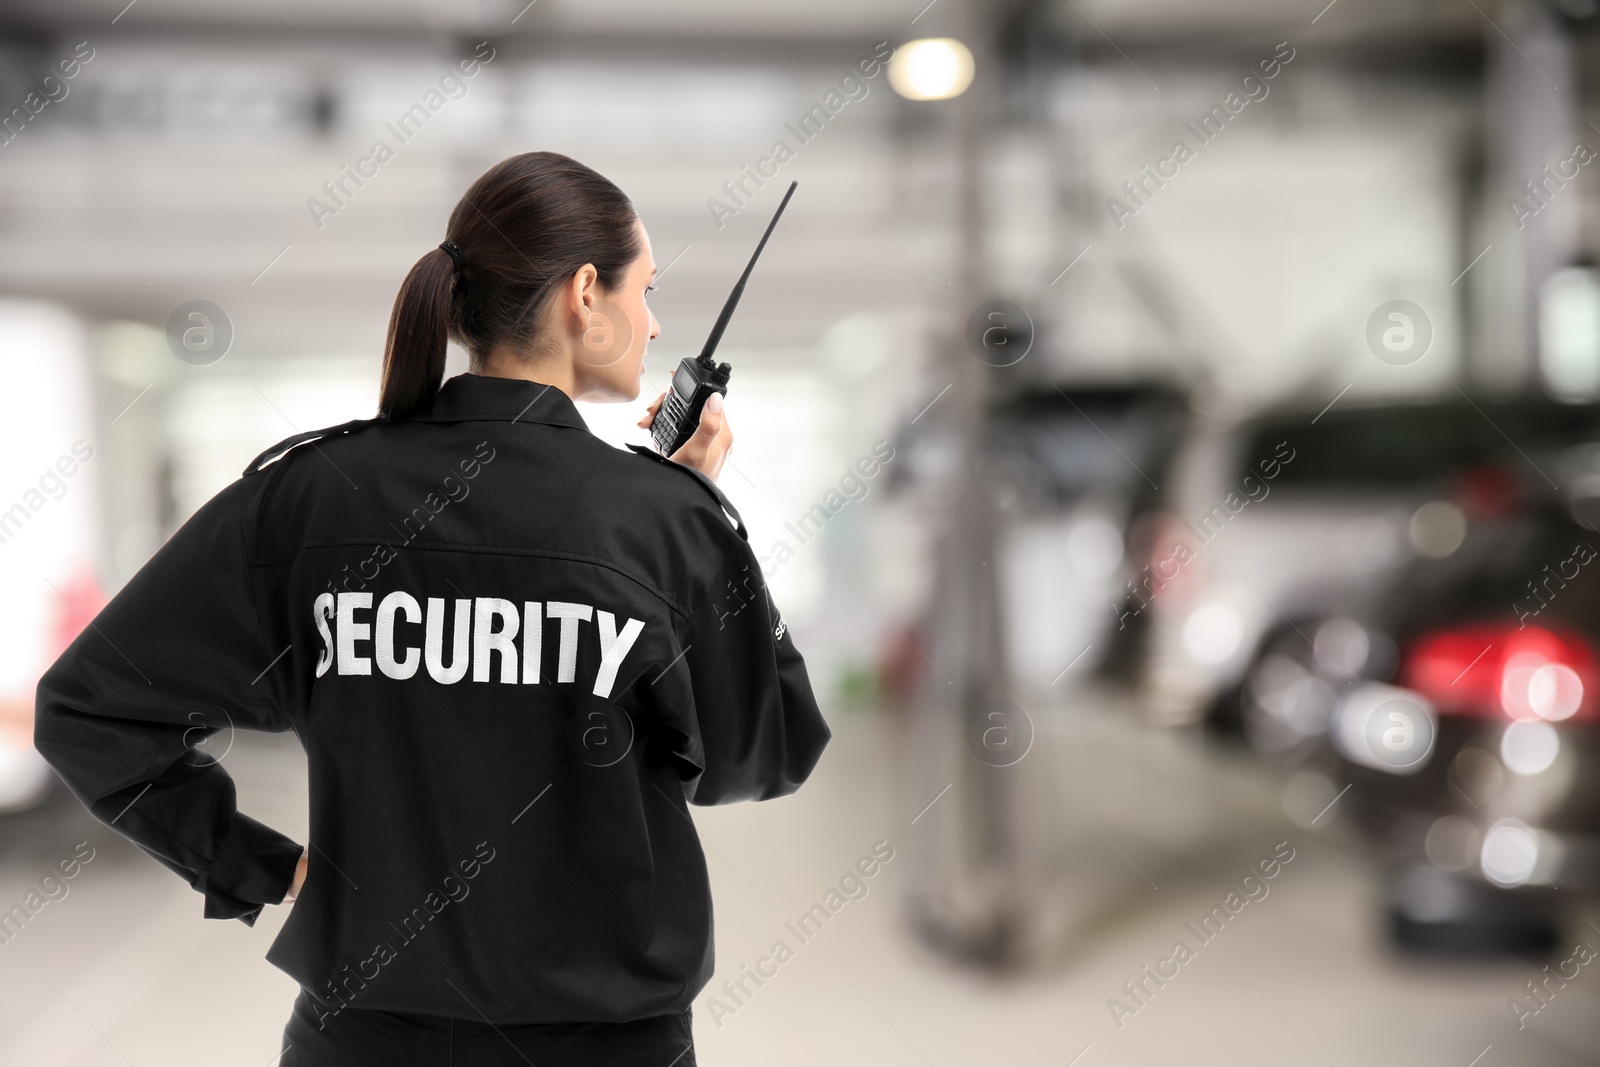 Image of Security guard using portable radio transmitter in automobile repair shop, space for text